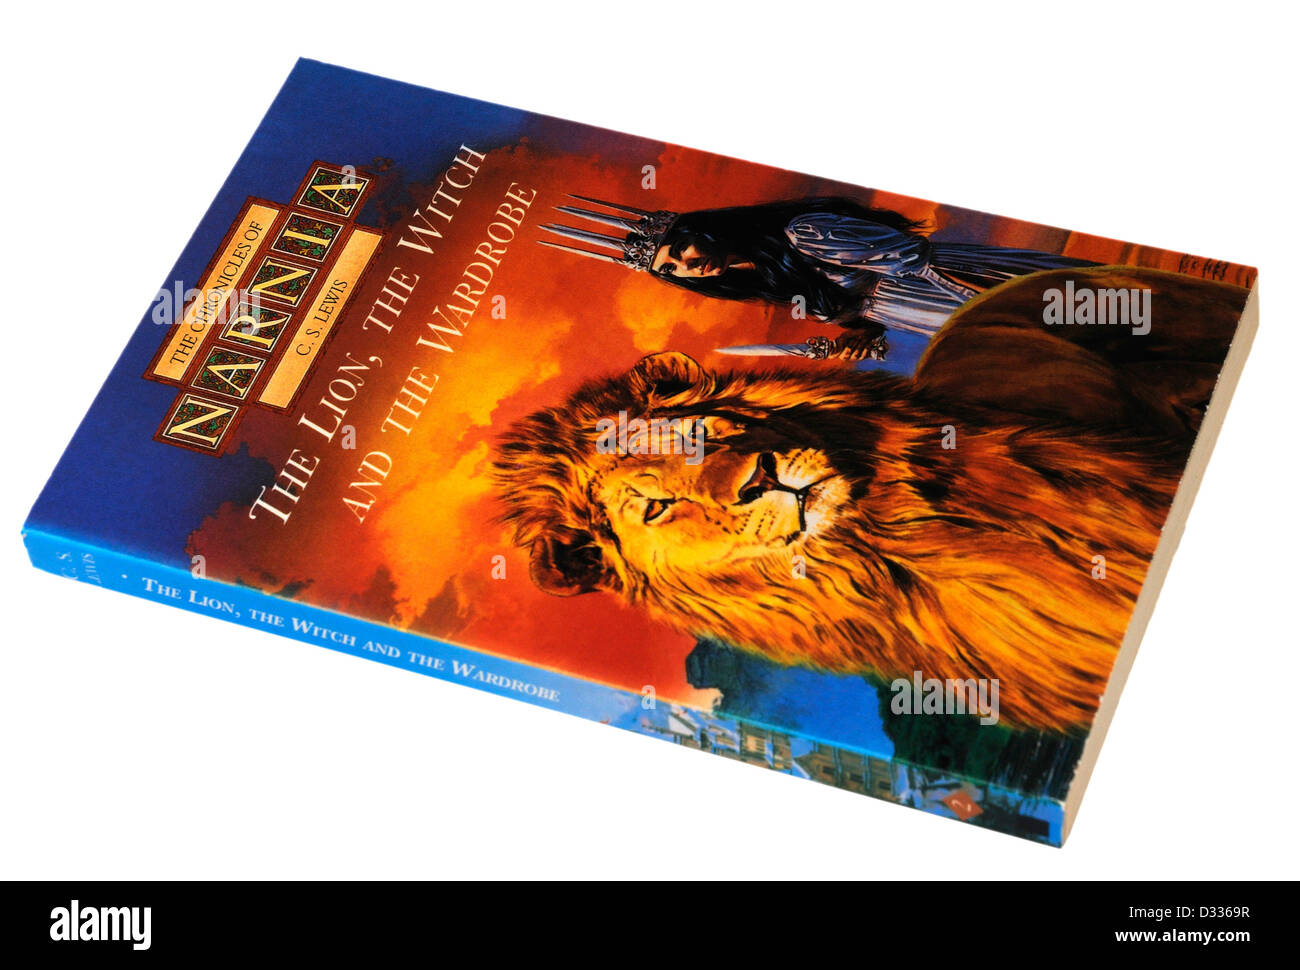 The Chronicles of Narnia - image #1874790 on